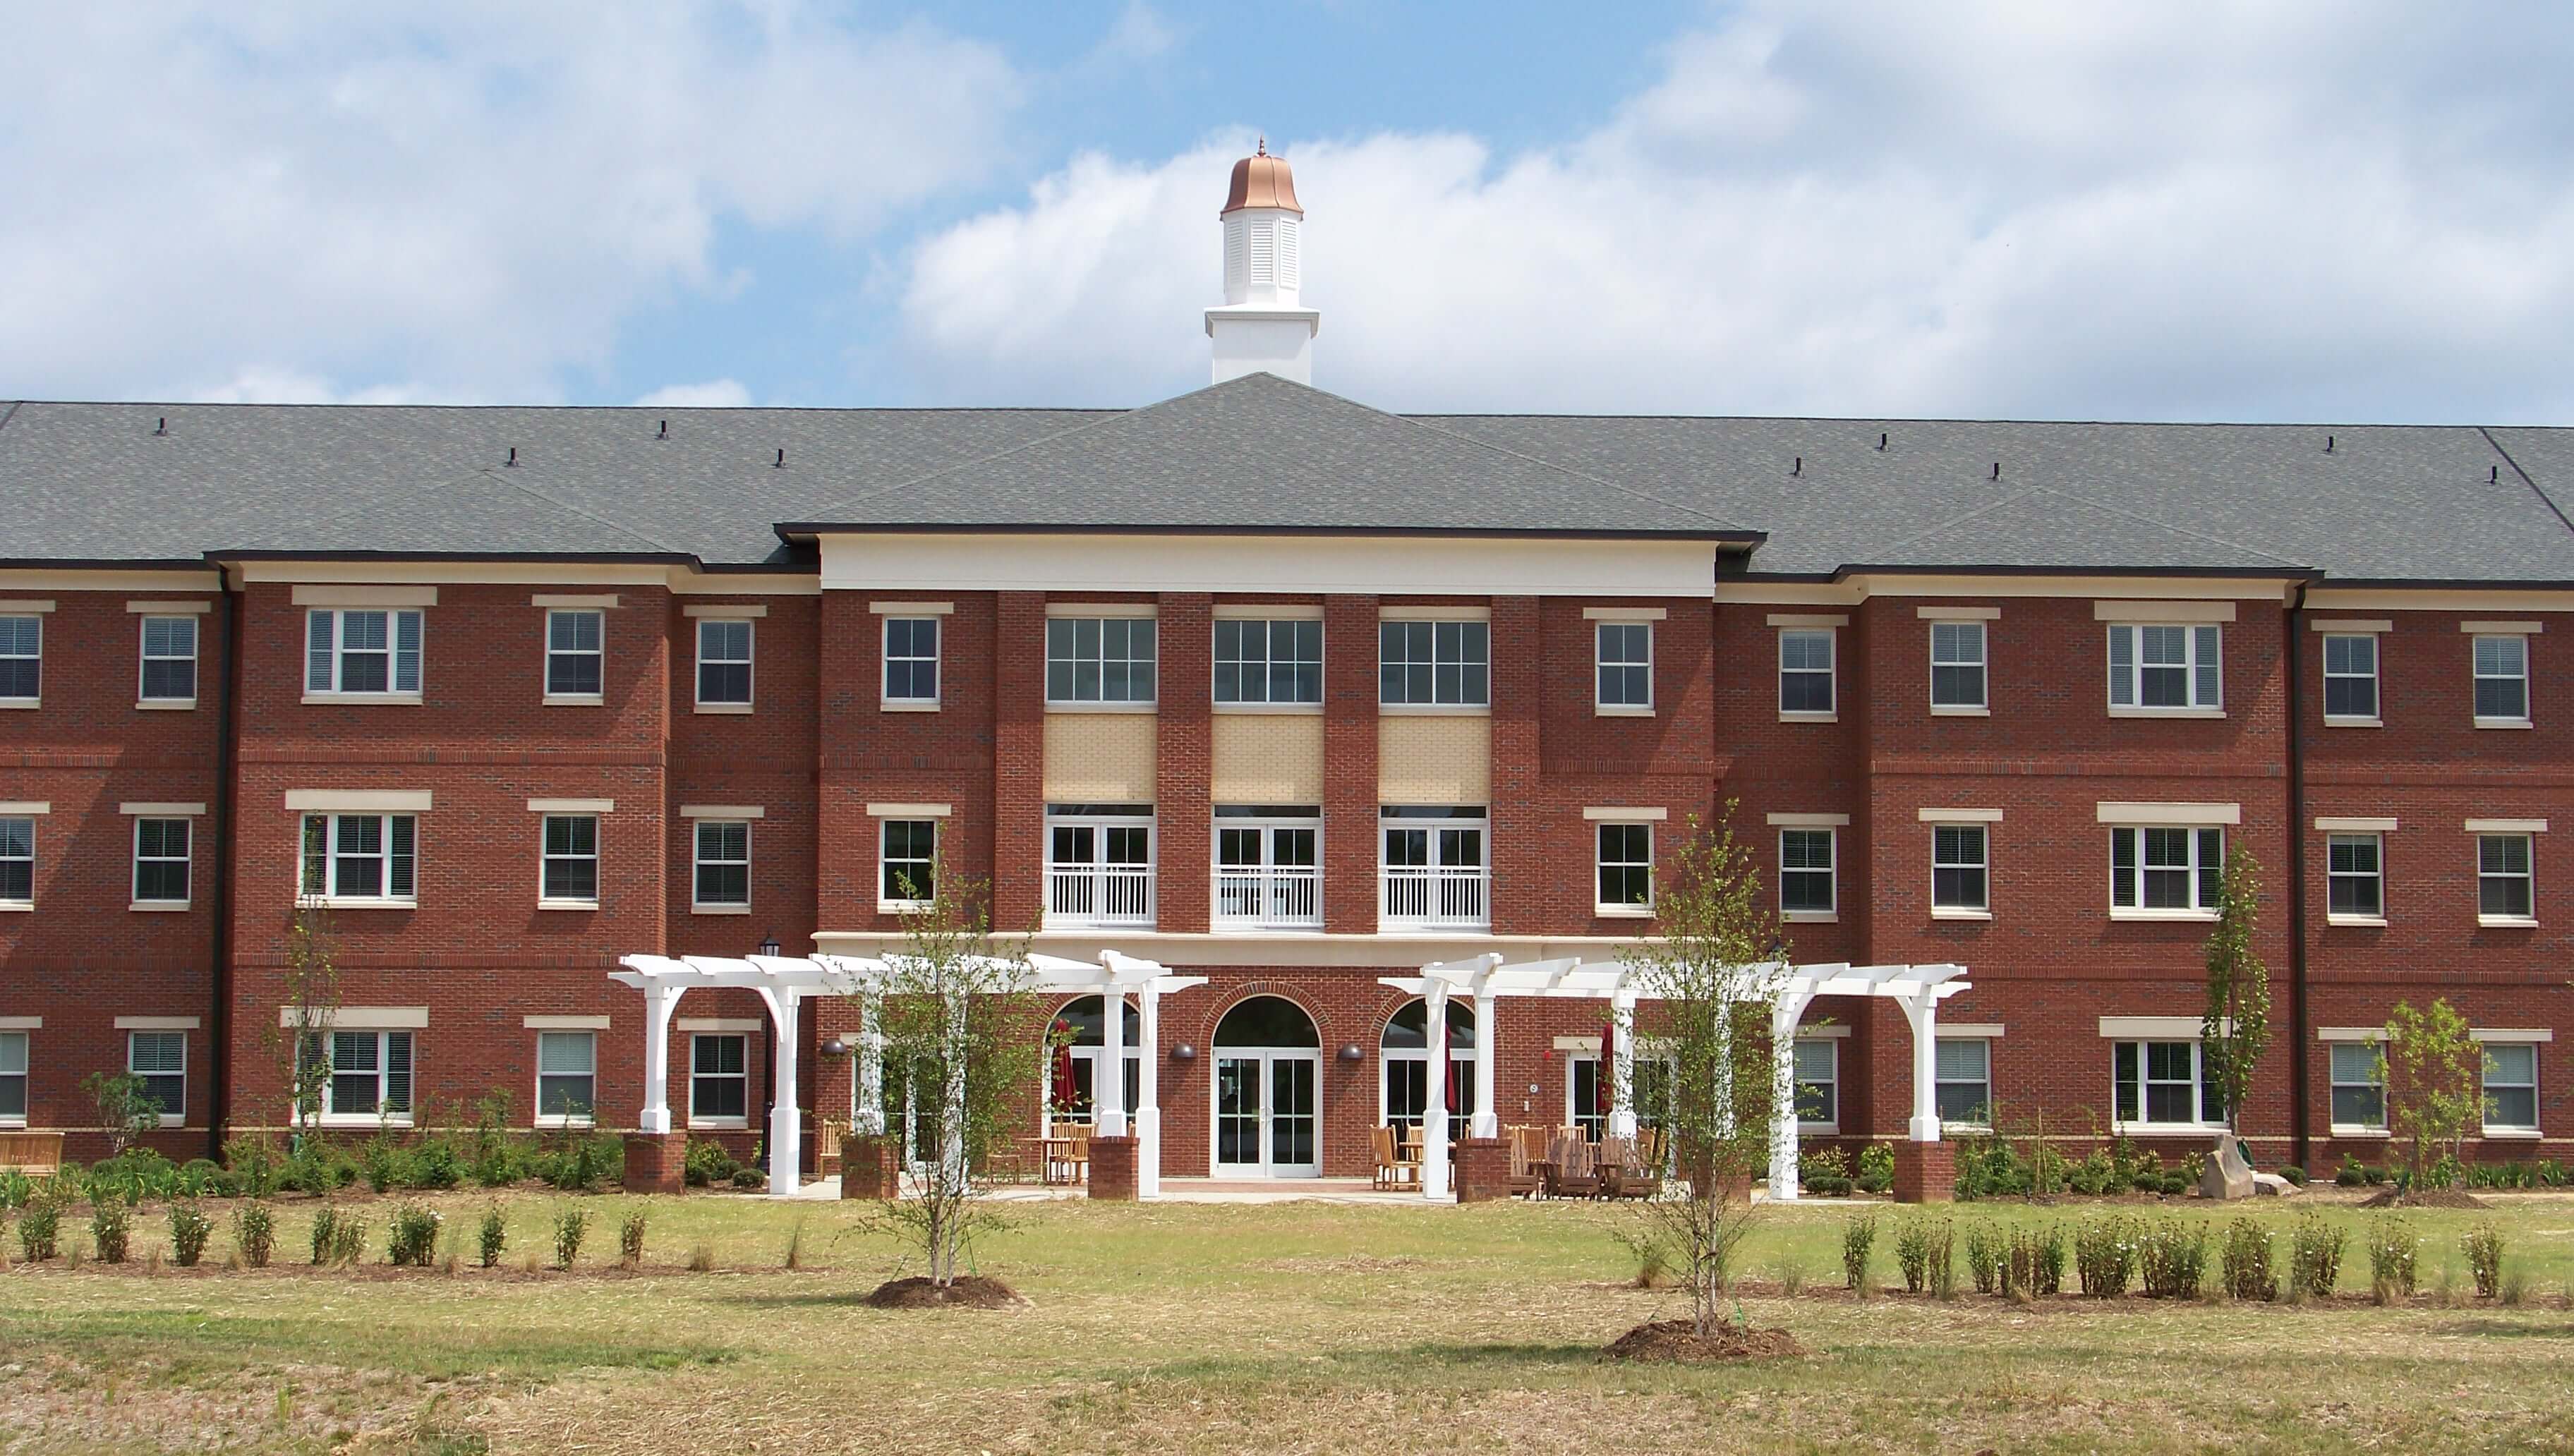 Meredith College